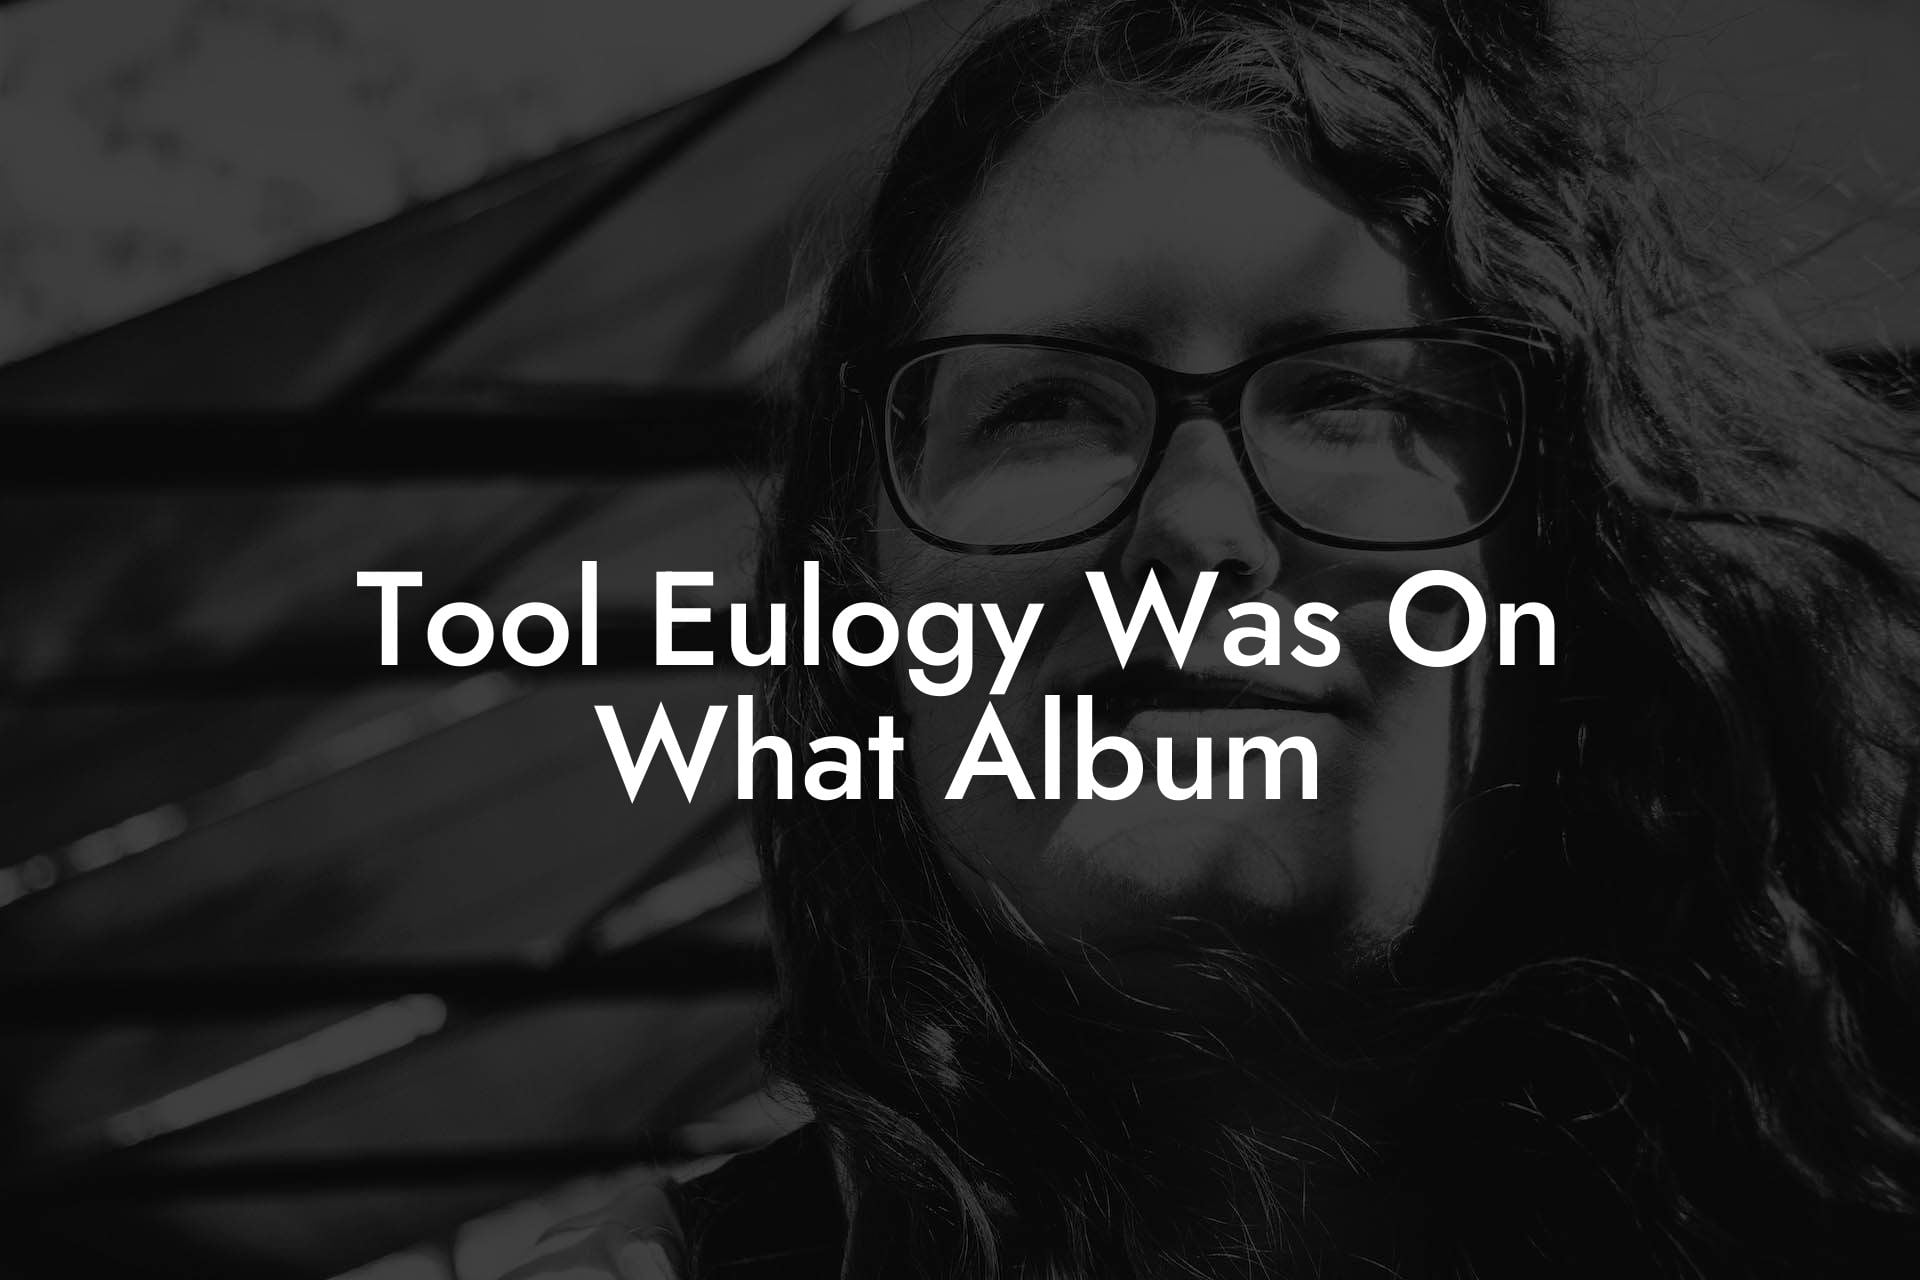 Tool Eulogy Was On What Album